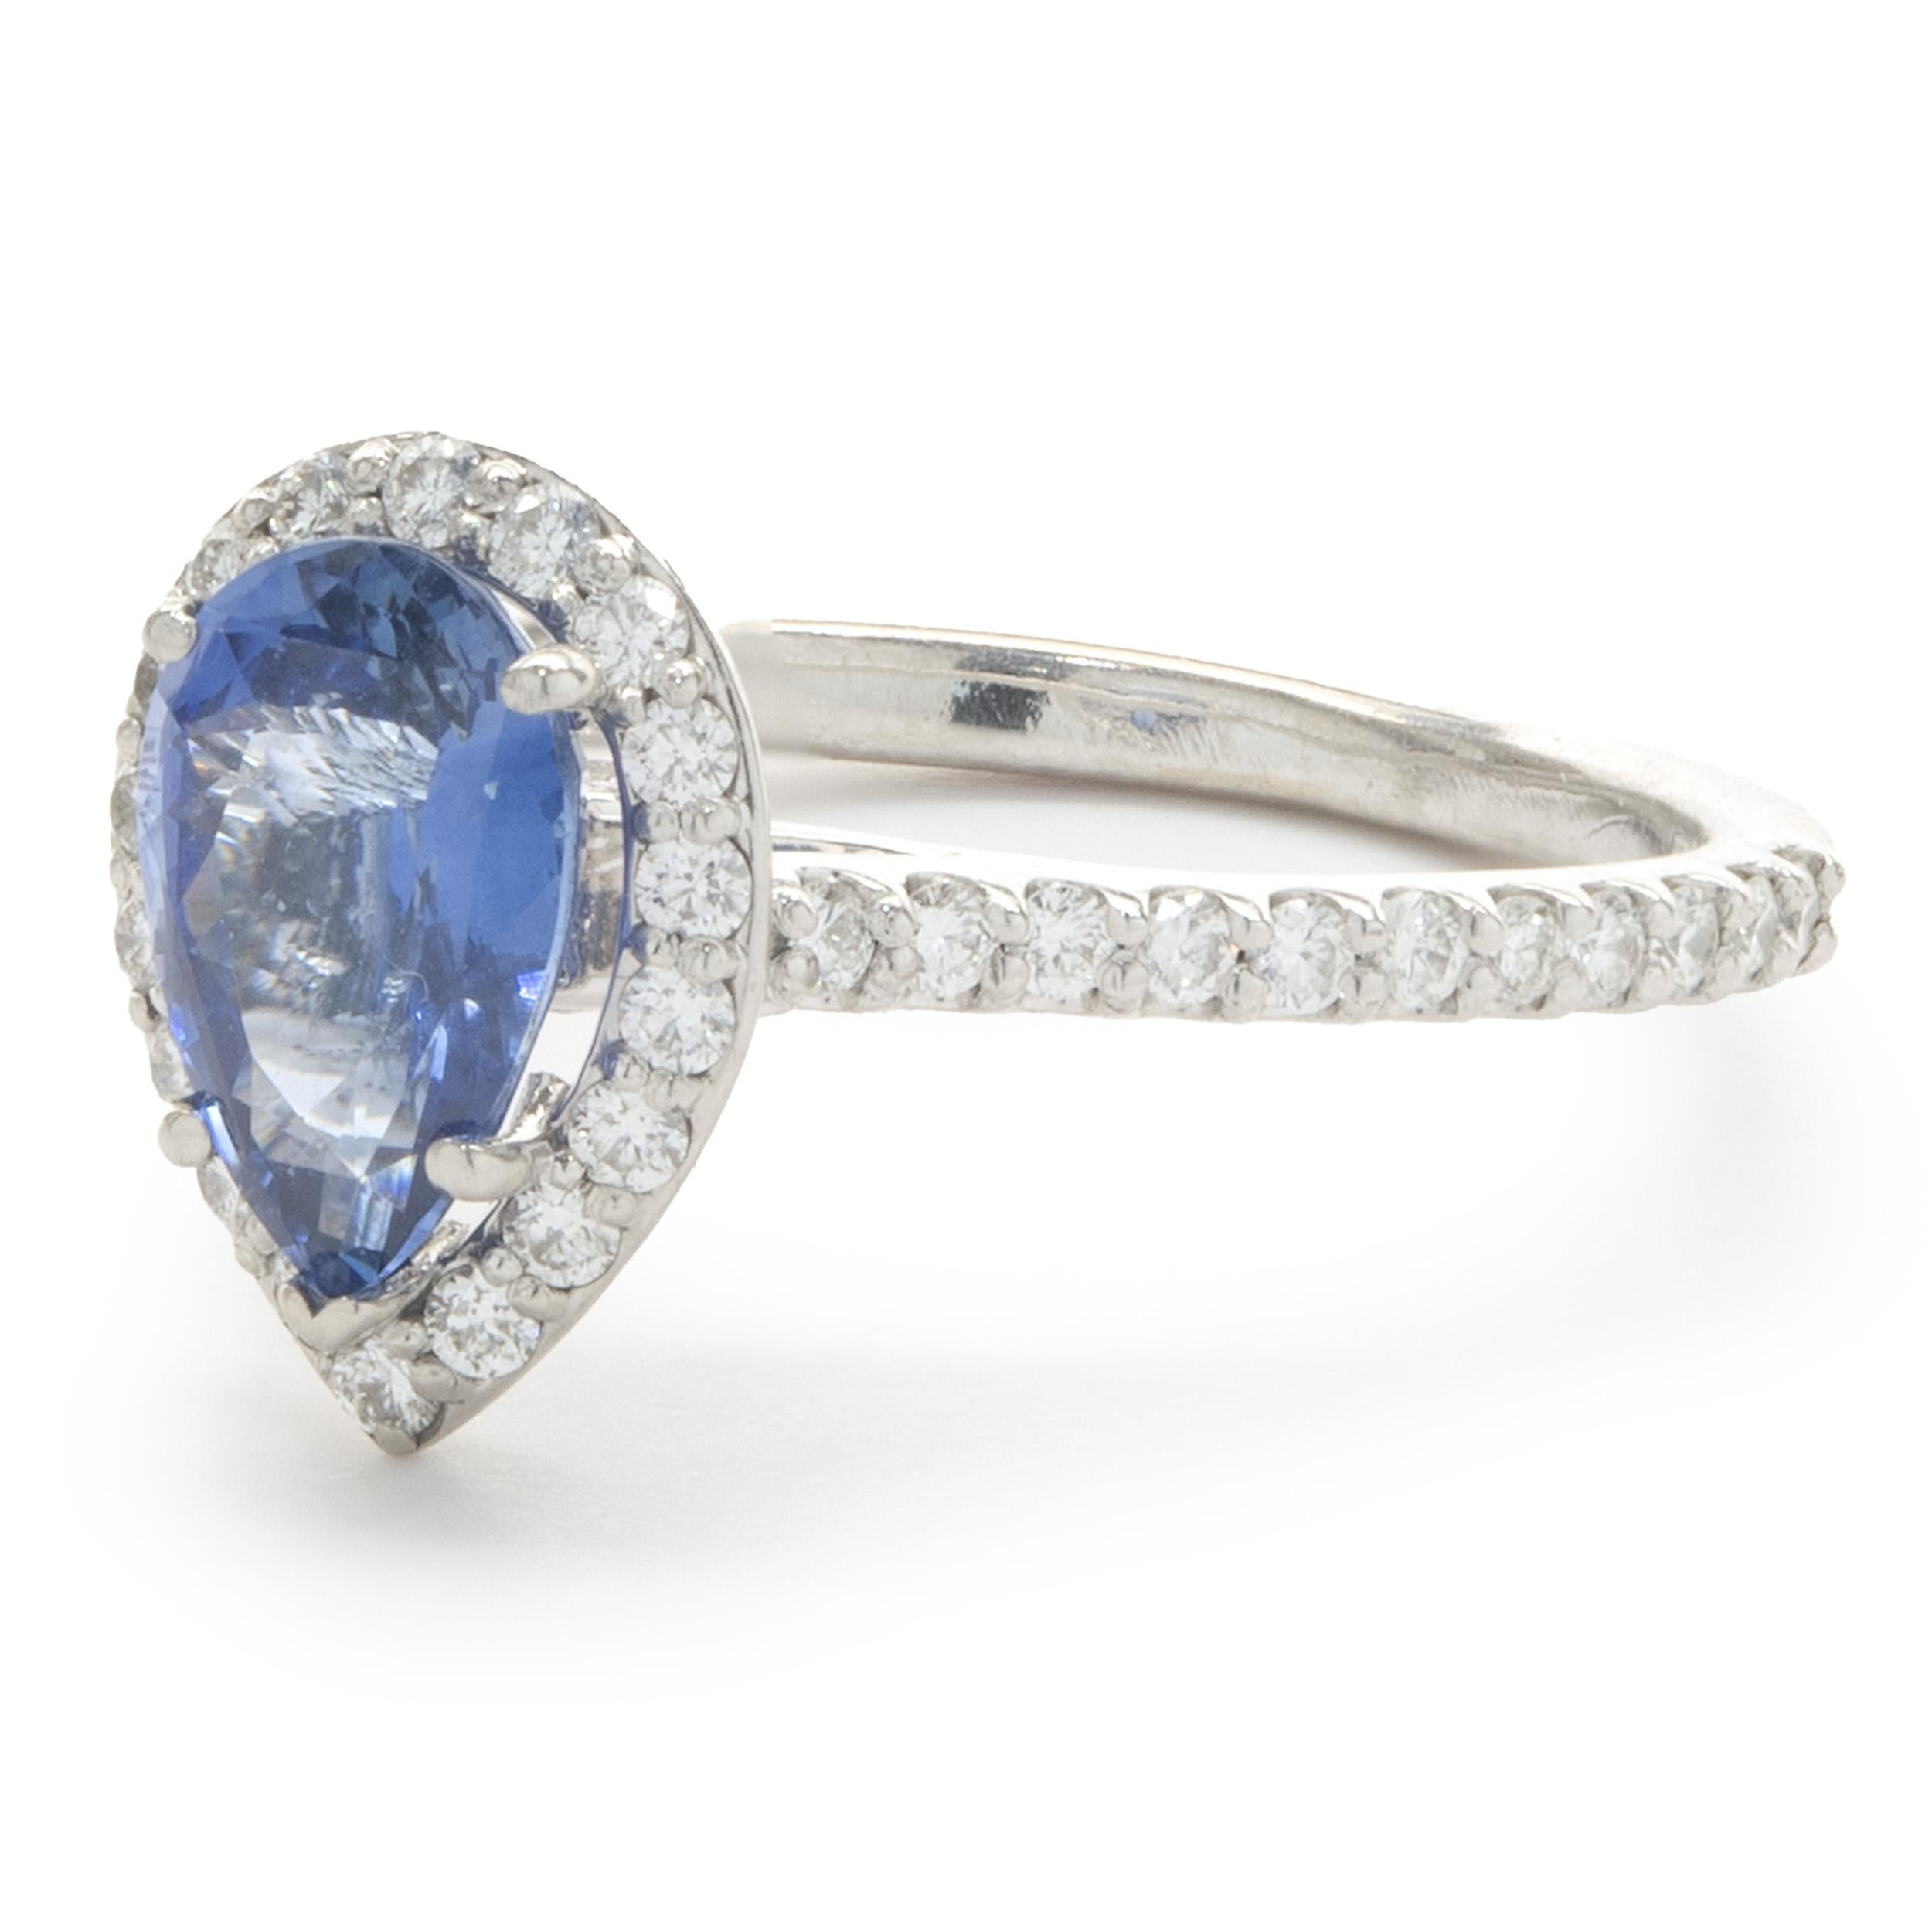 Women's 14 Karat White Gold Pear Cut Sapphire and Diamond Ring For Sale